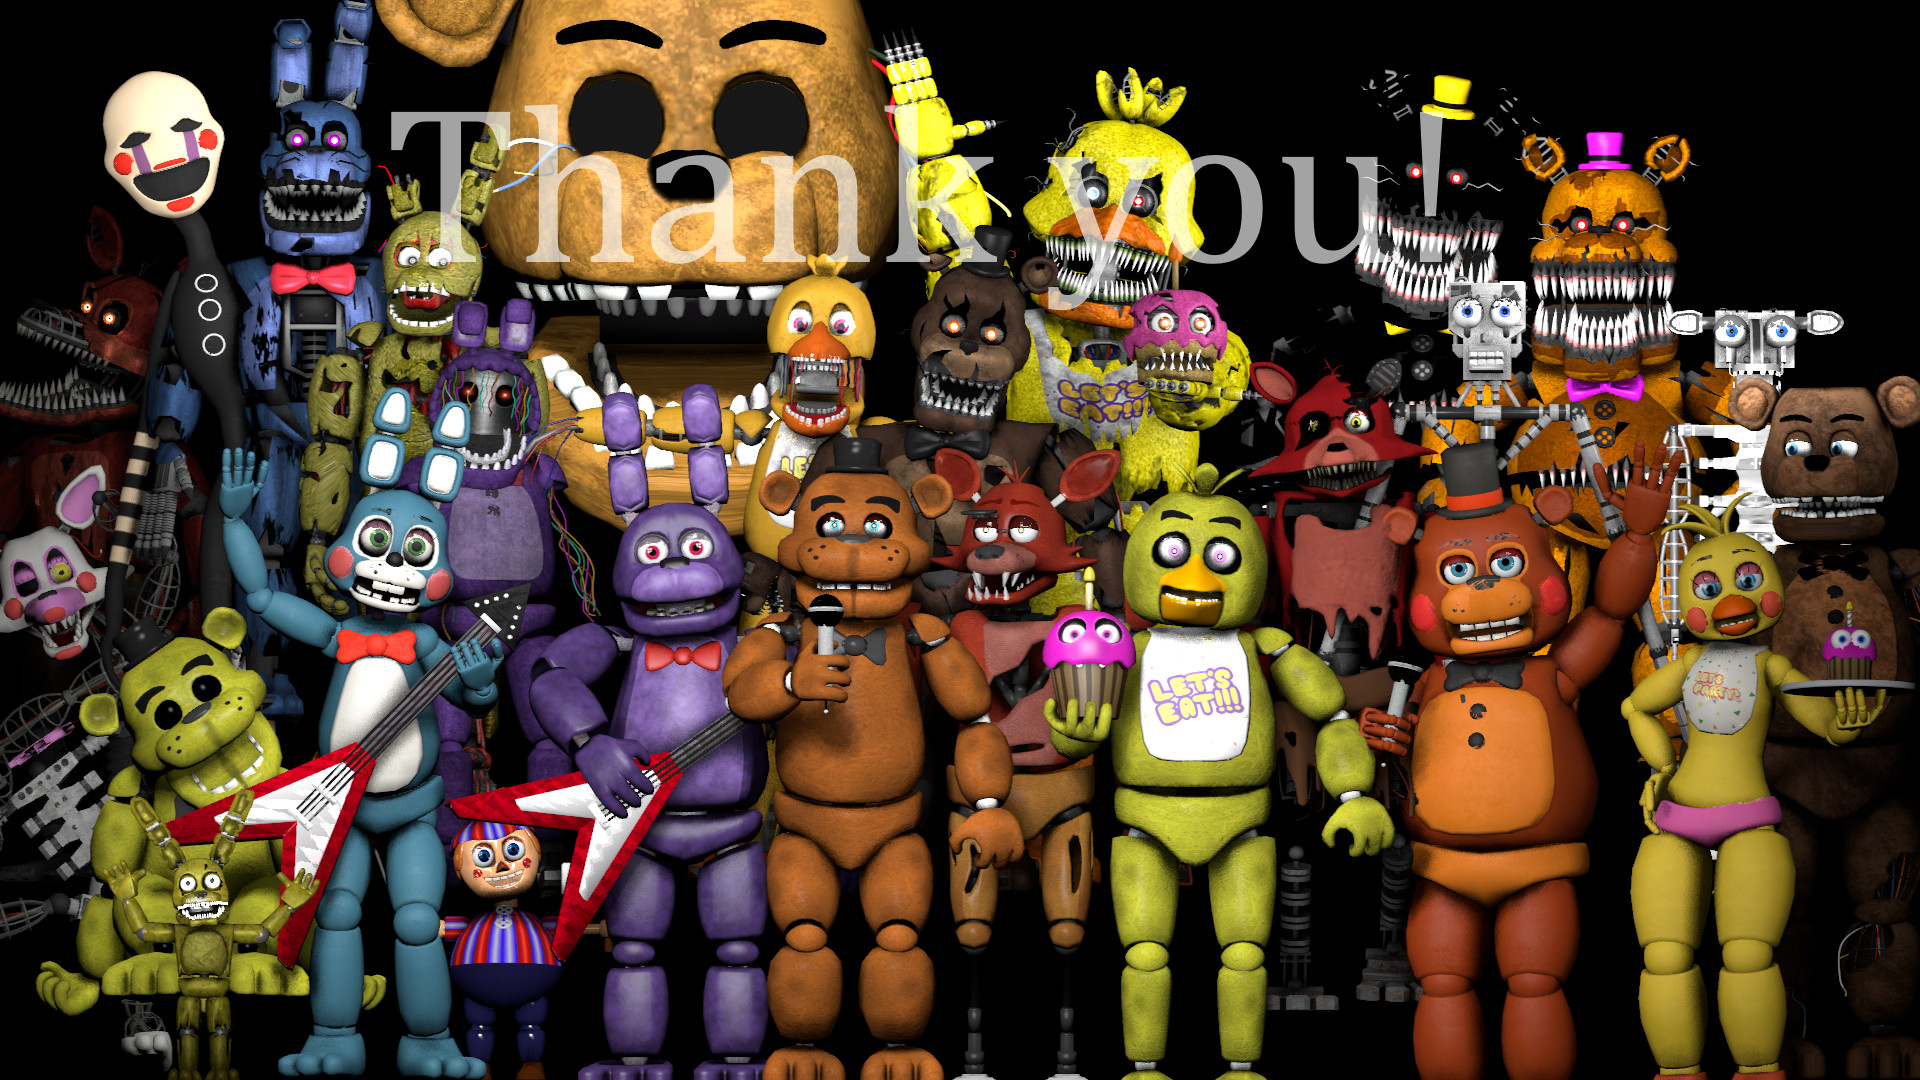 HD Quality Creative FNAF Thank You Pictures, 1920×1080, Deandrea Perras